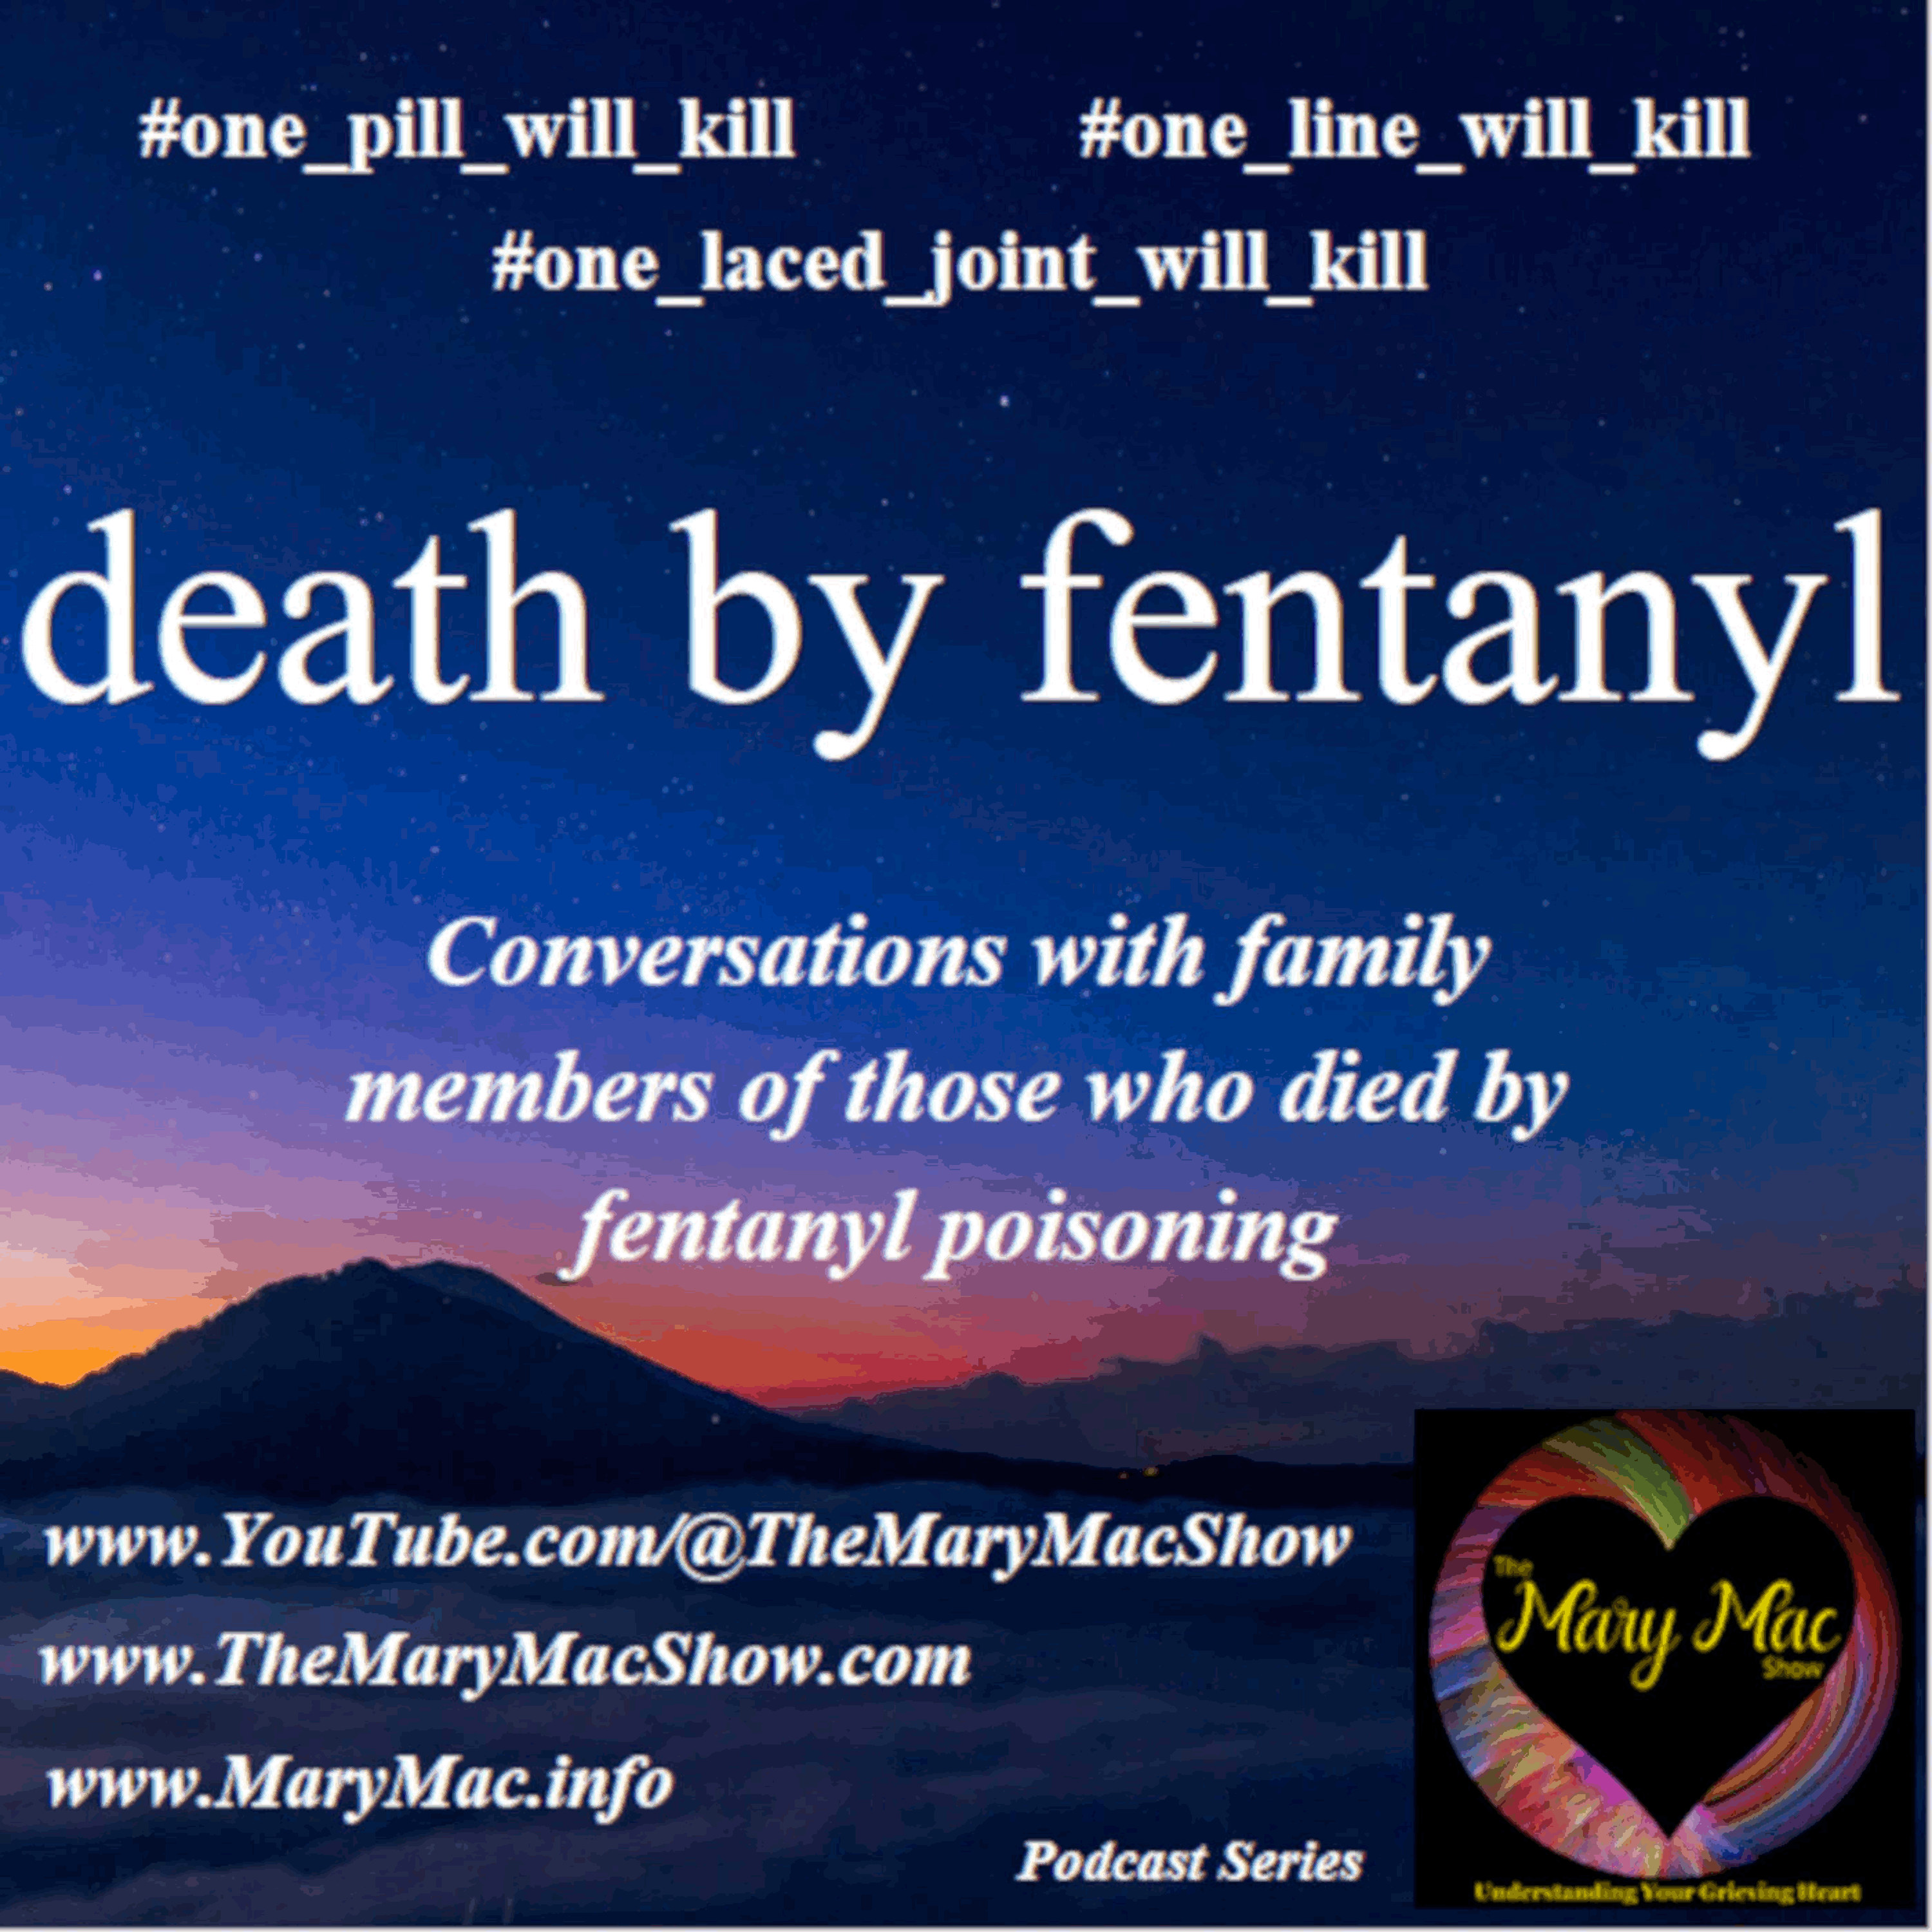 Death By Fentanyl Podcast Series | The Pharmacist Dan Schneider’s Crusade Against OxyContin